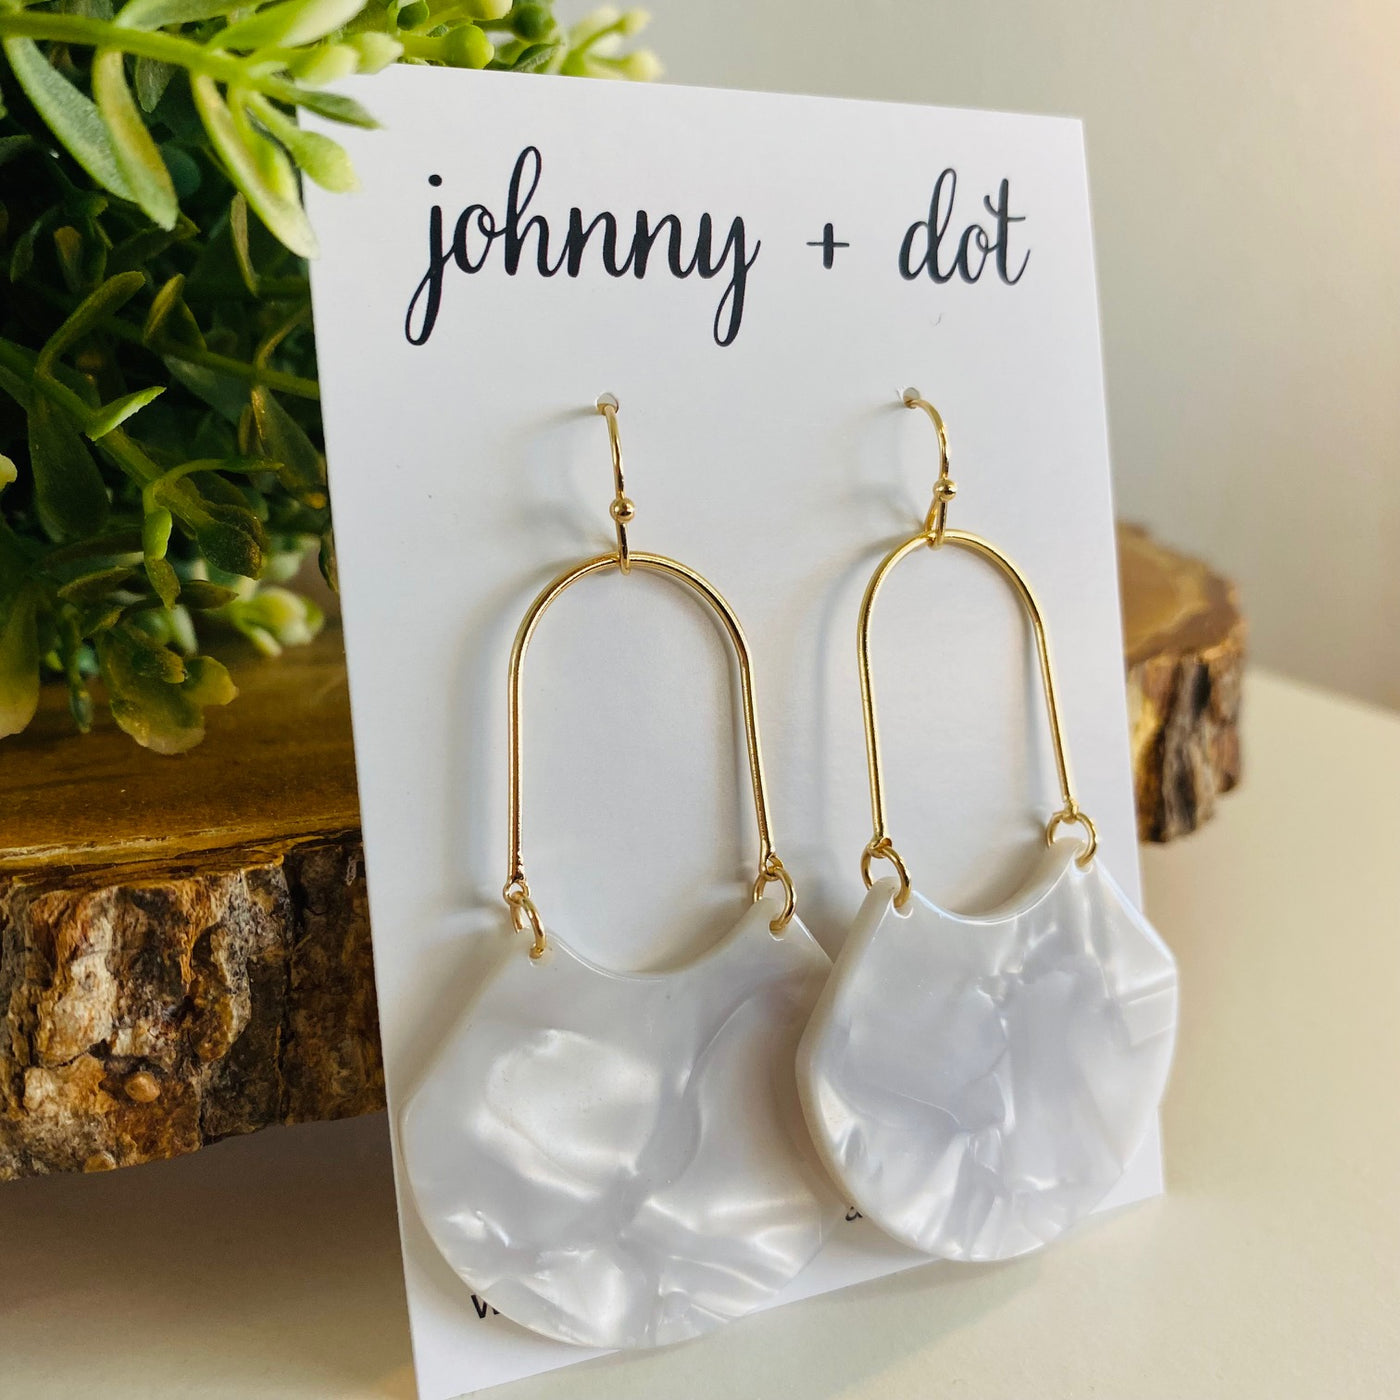 An open oval drop hoop earring with gold hardware and a white marble acetate finish displayed on a Johnny & Dot earring card.